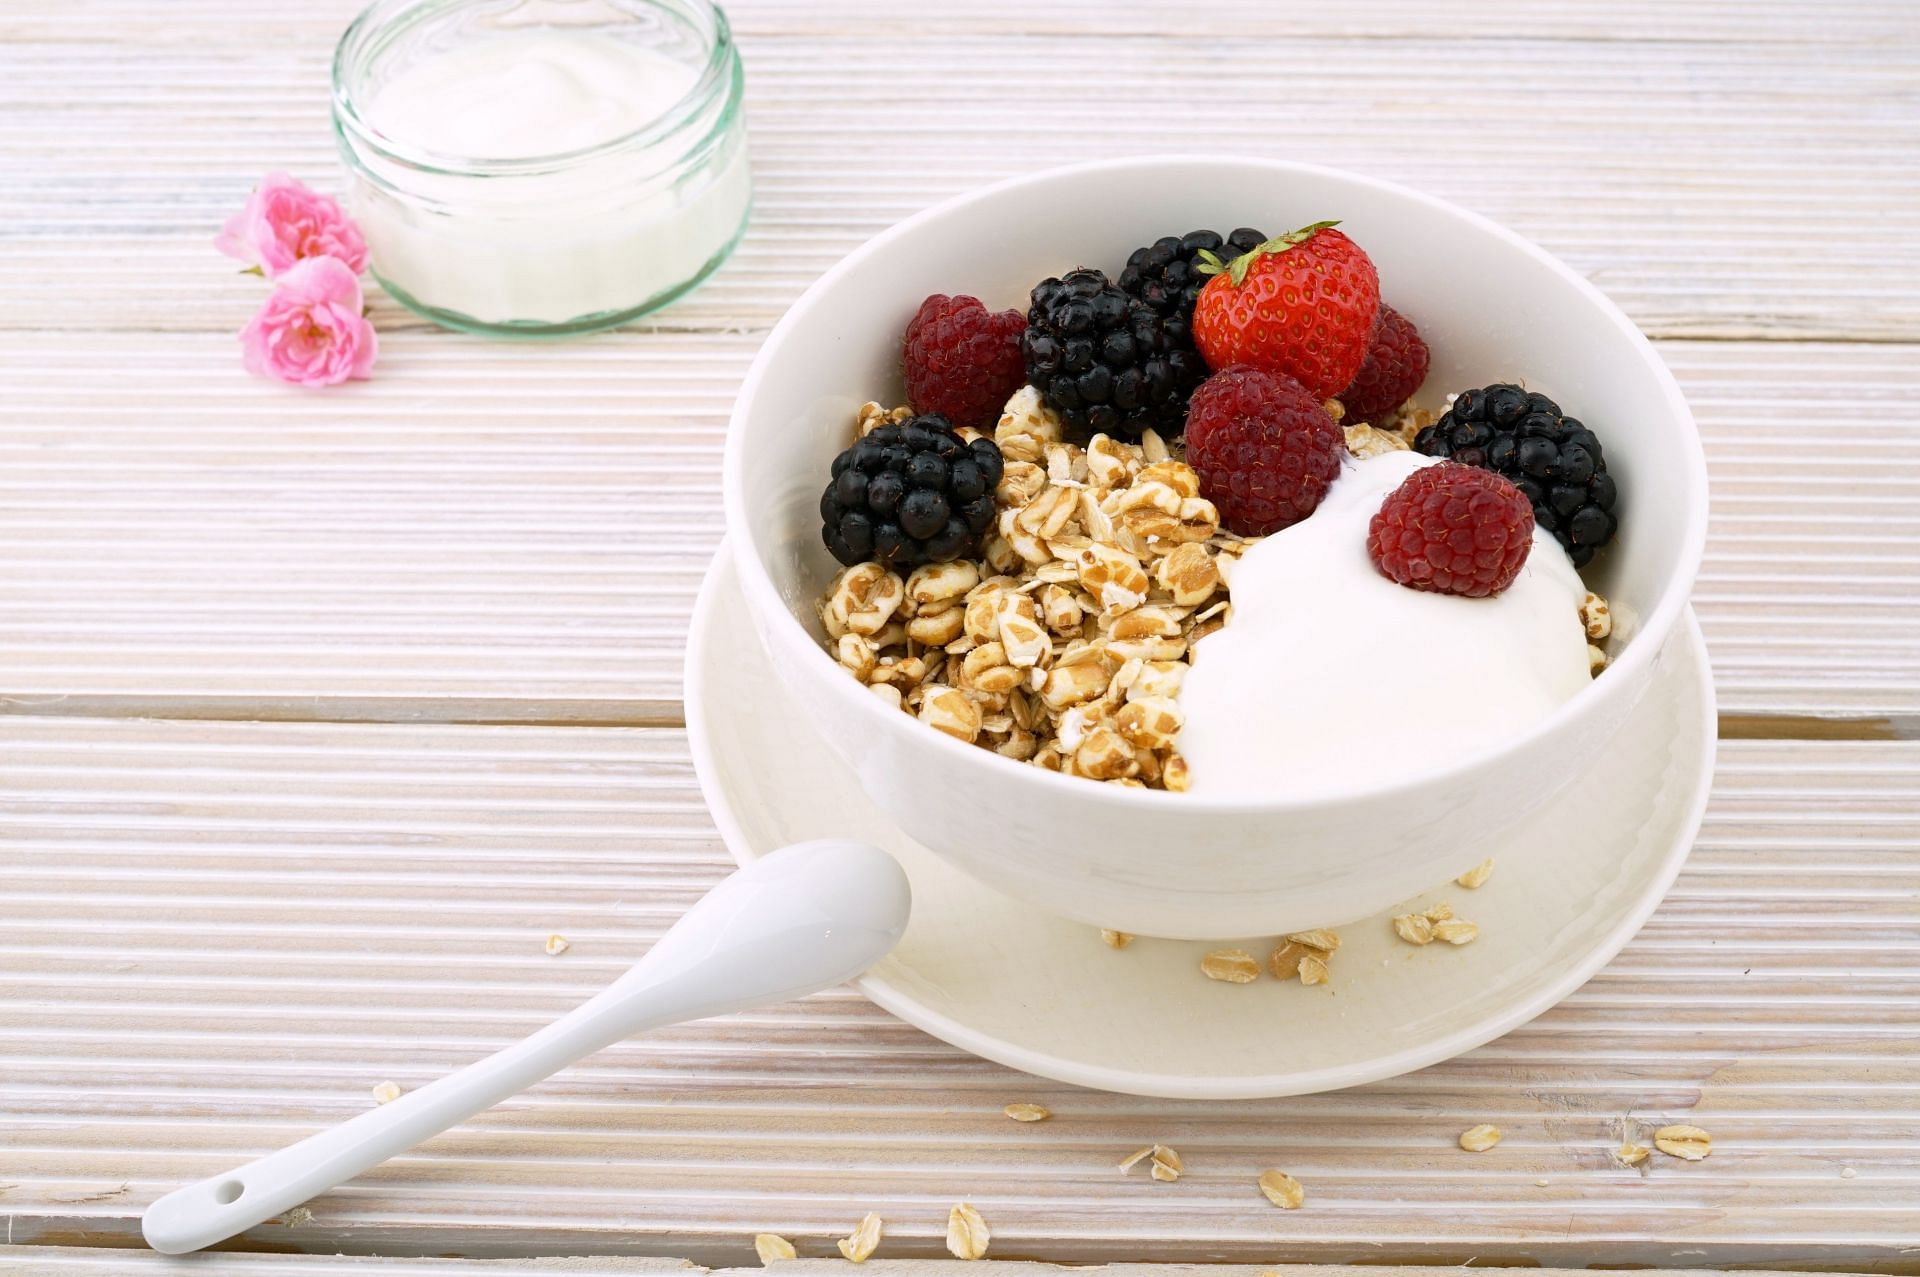 Yoghurt eating to help anxiety (image sourced via Pexels / Photo by life of pix)